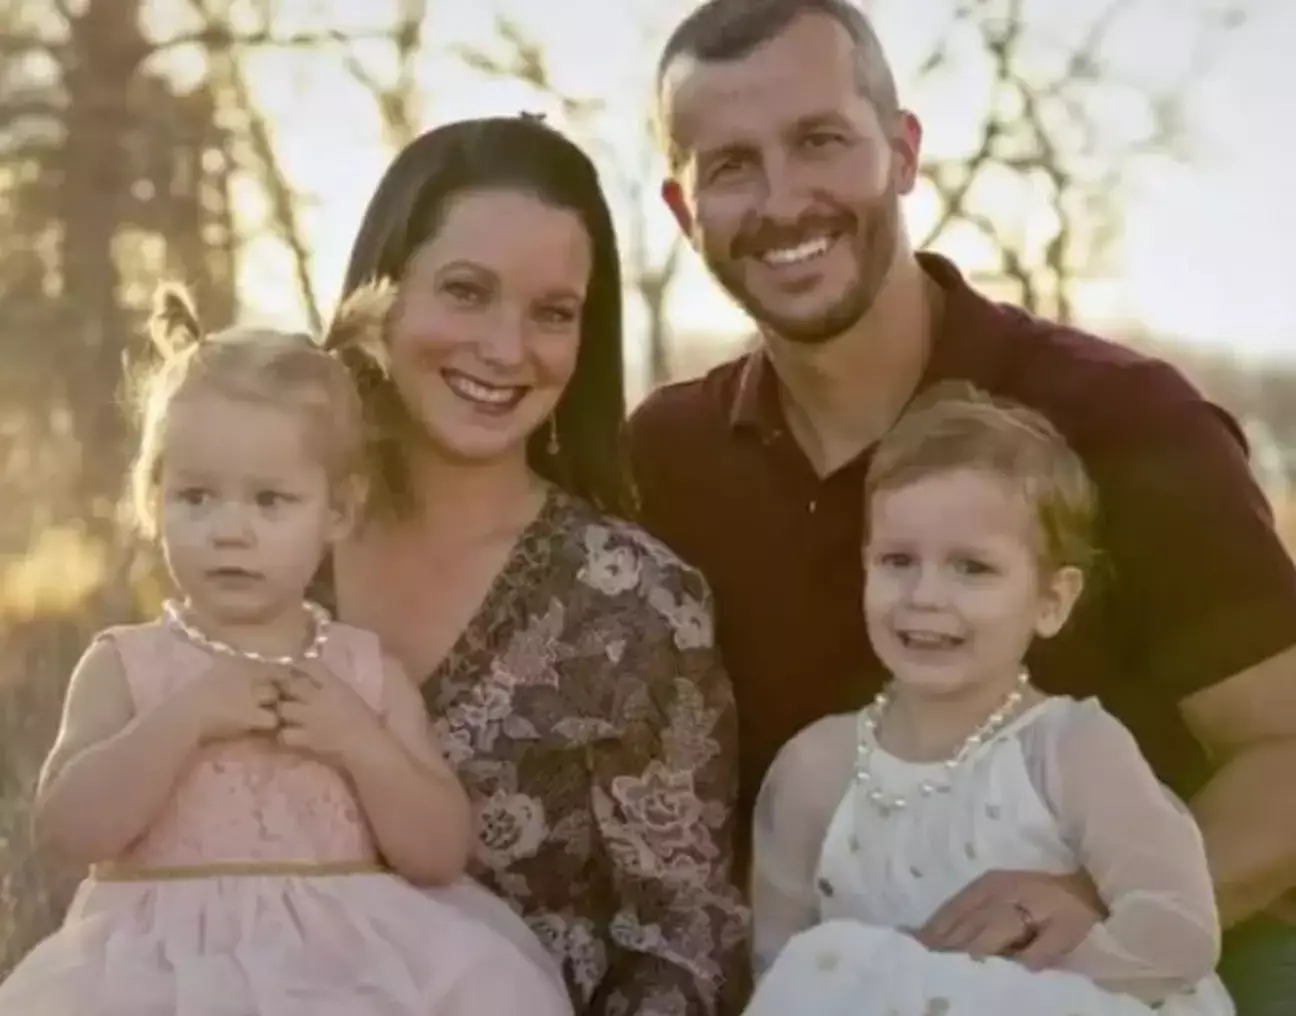 Chris and Shanann Watts with their two daughters.